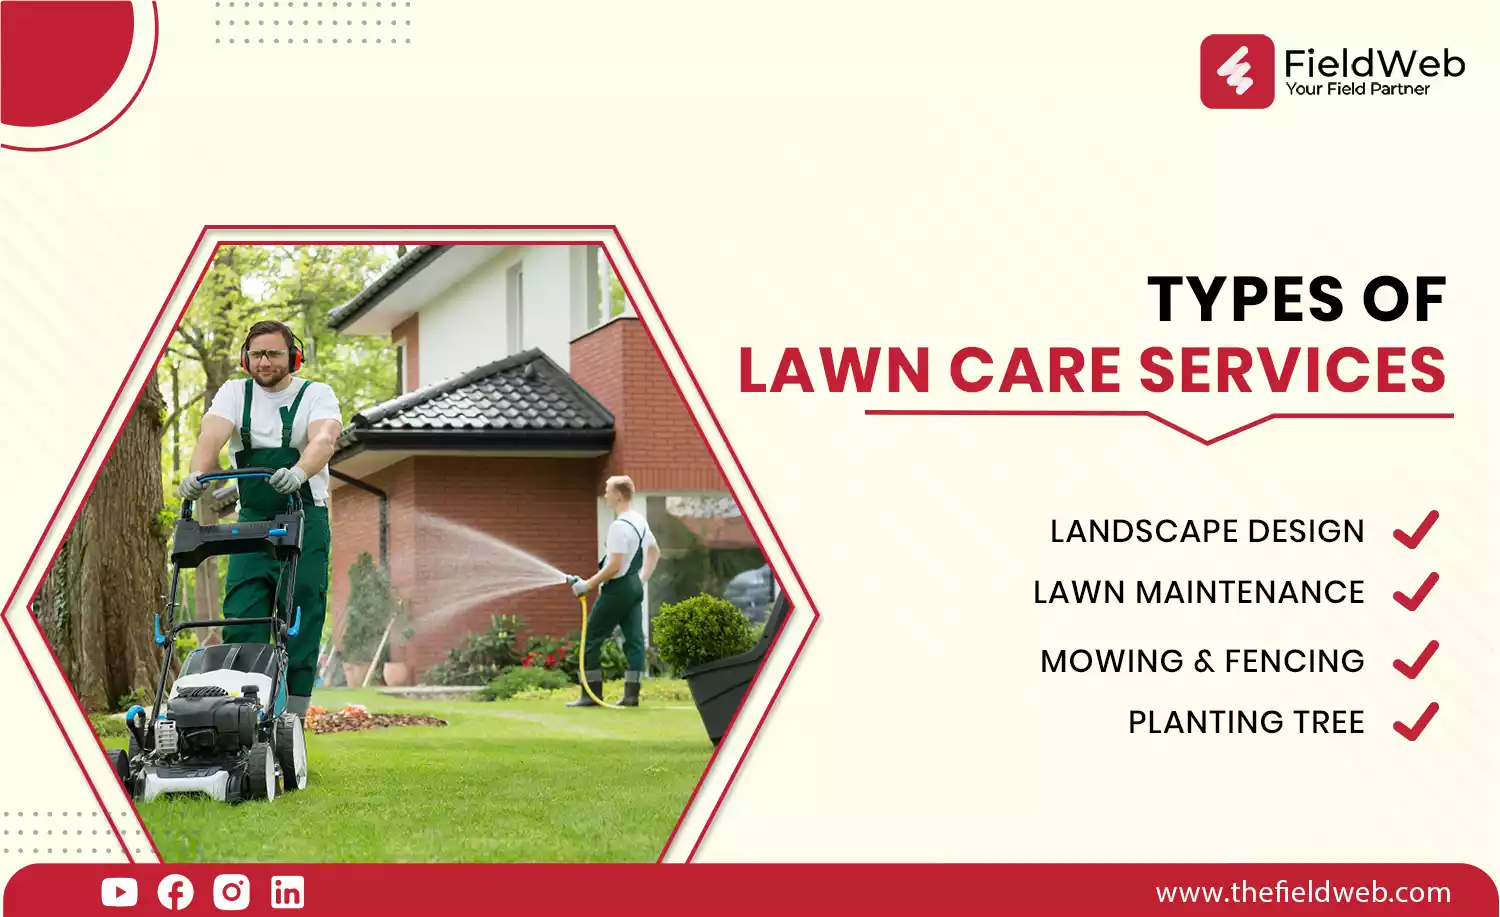 image is displaying 5 types of lawn care services